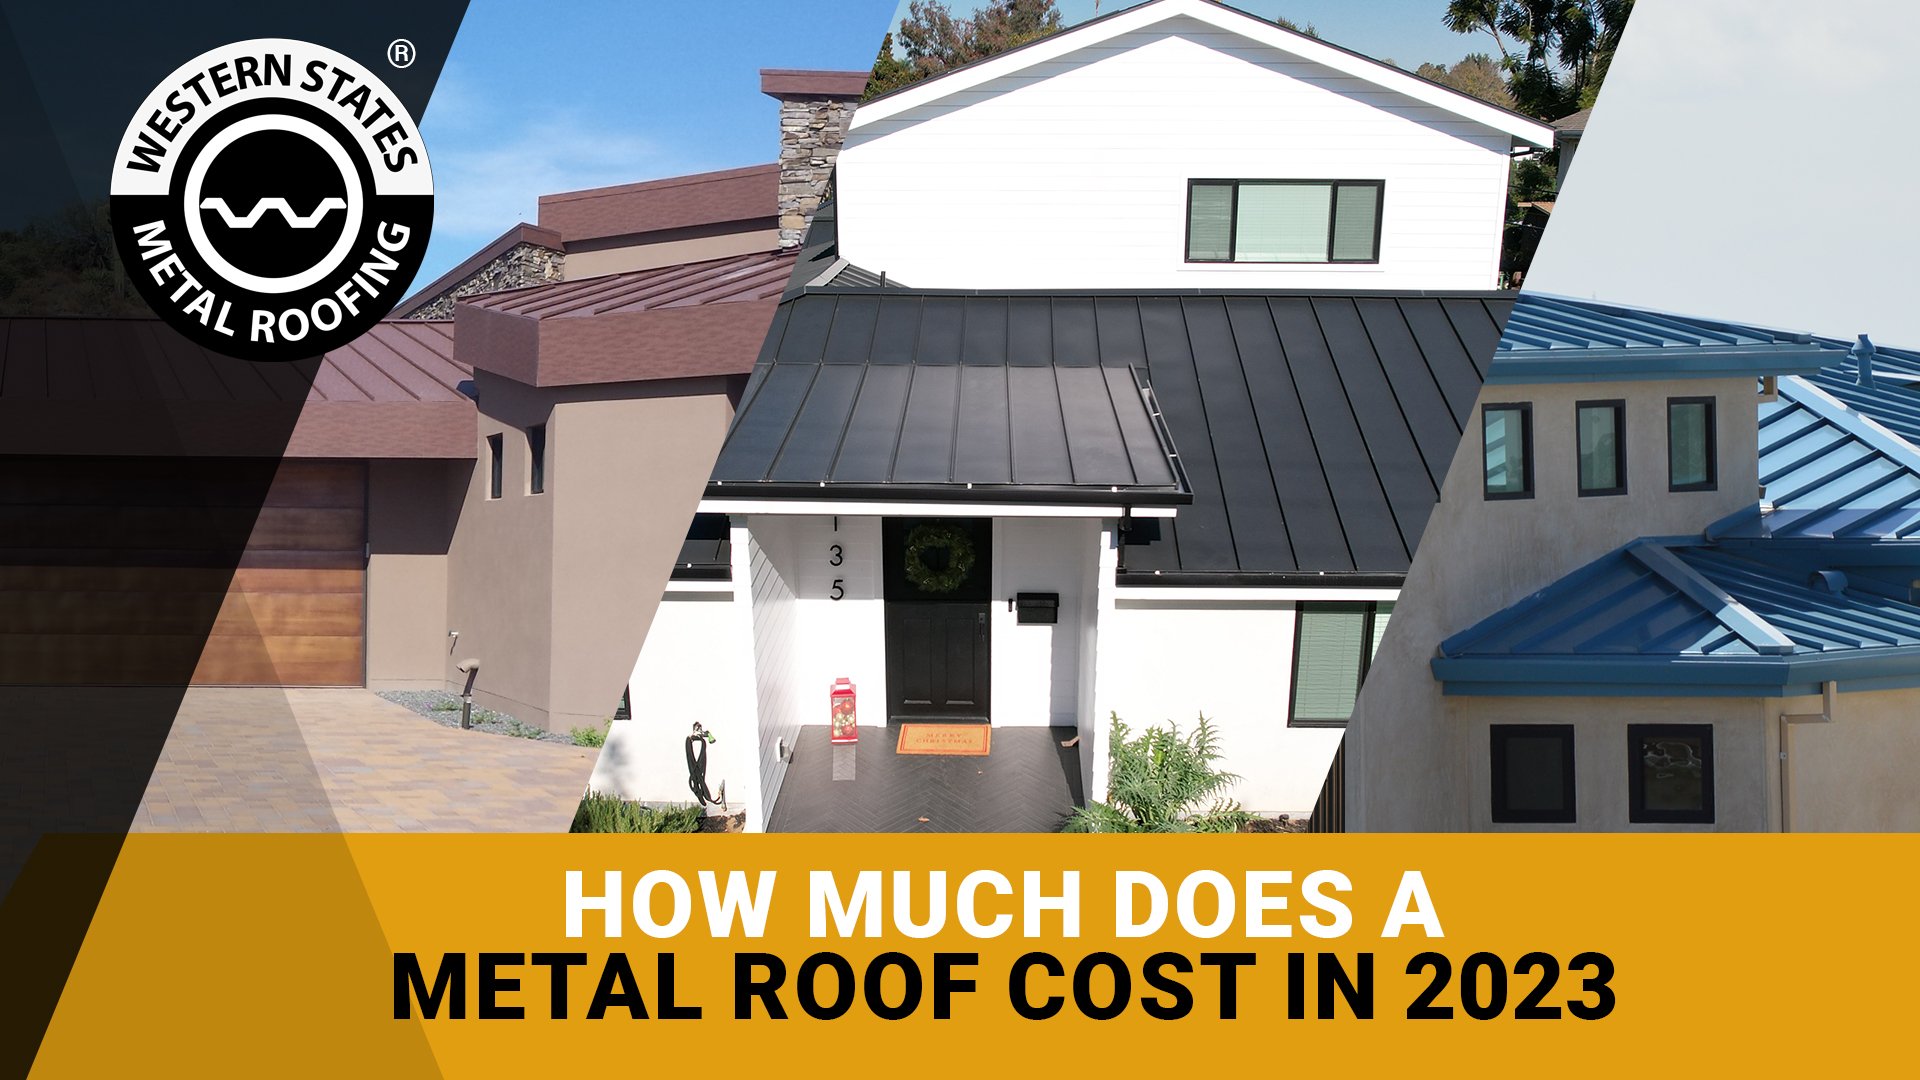 Slate Roof - Cost to install, Pros, Cons and Buyers Guide in 2021